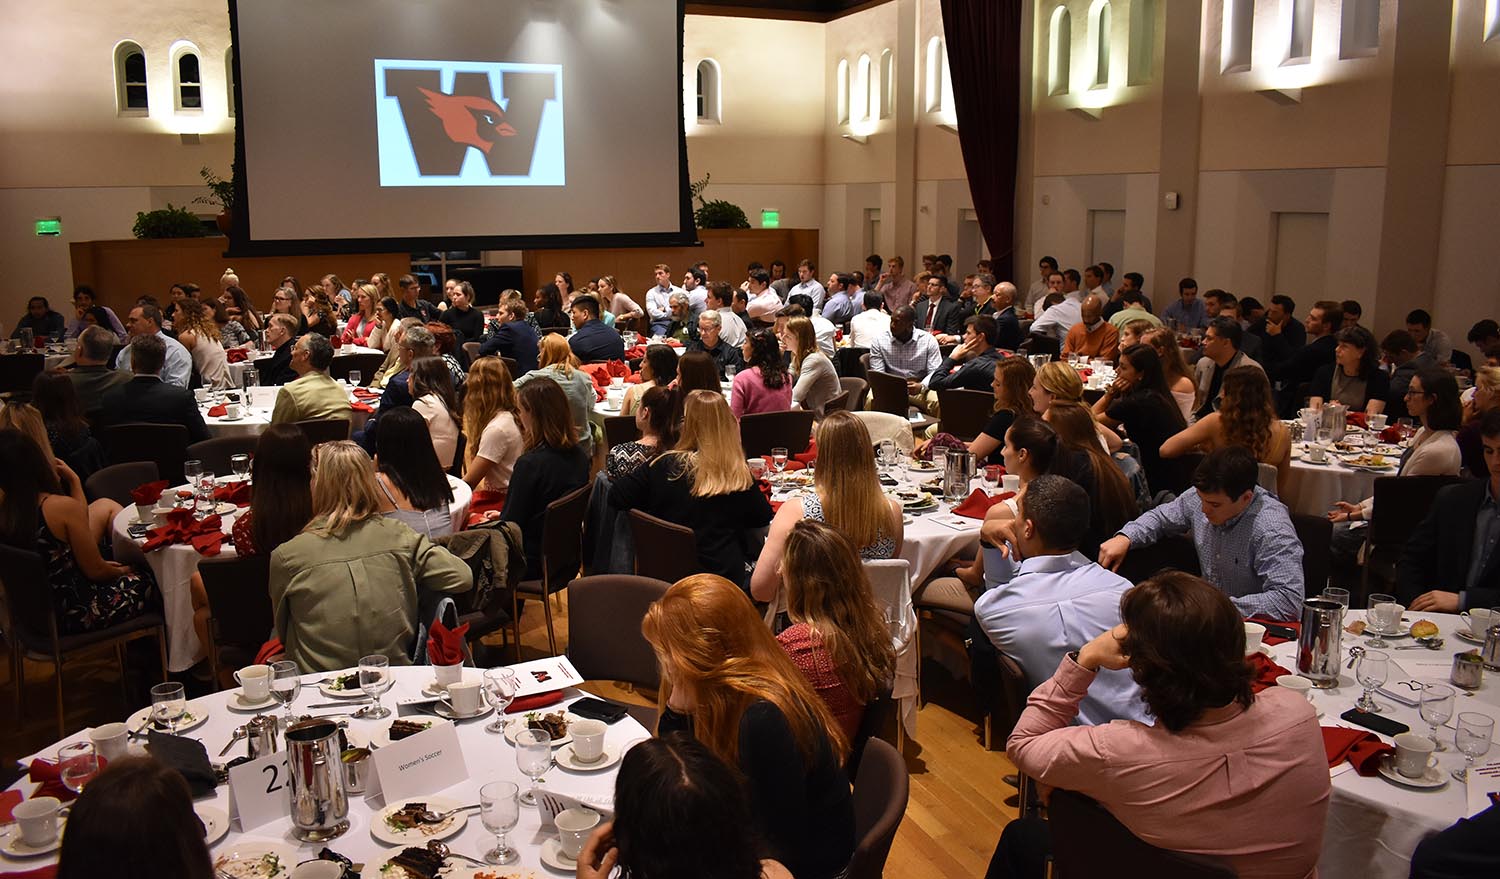 On May 2, Wesleyan Athletics celebrated its student-athletes and coaches at the seventh annual Scholar-Athlete Dinner in Beckham Hall. (Photos by Tom Dzimian)